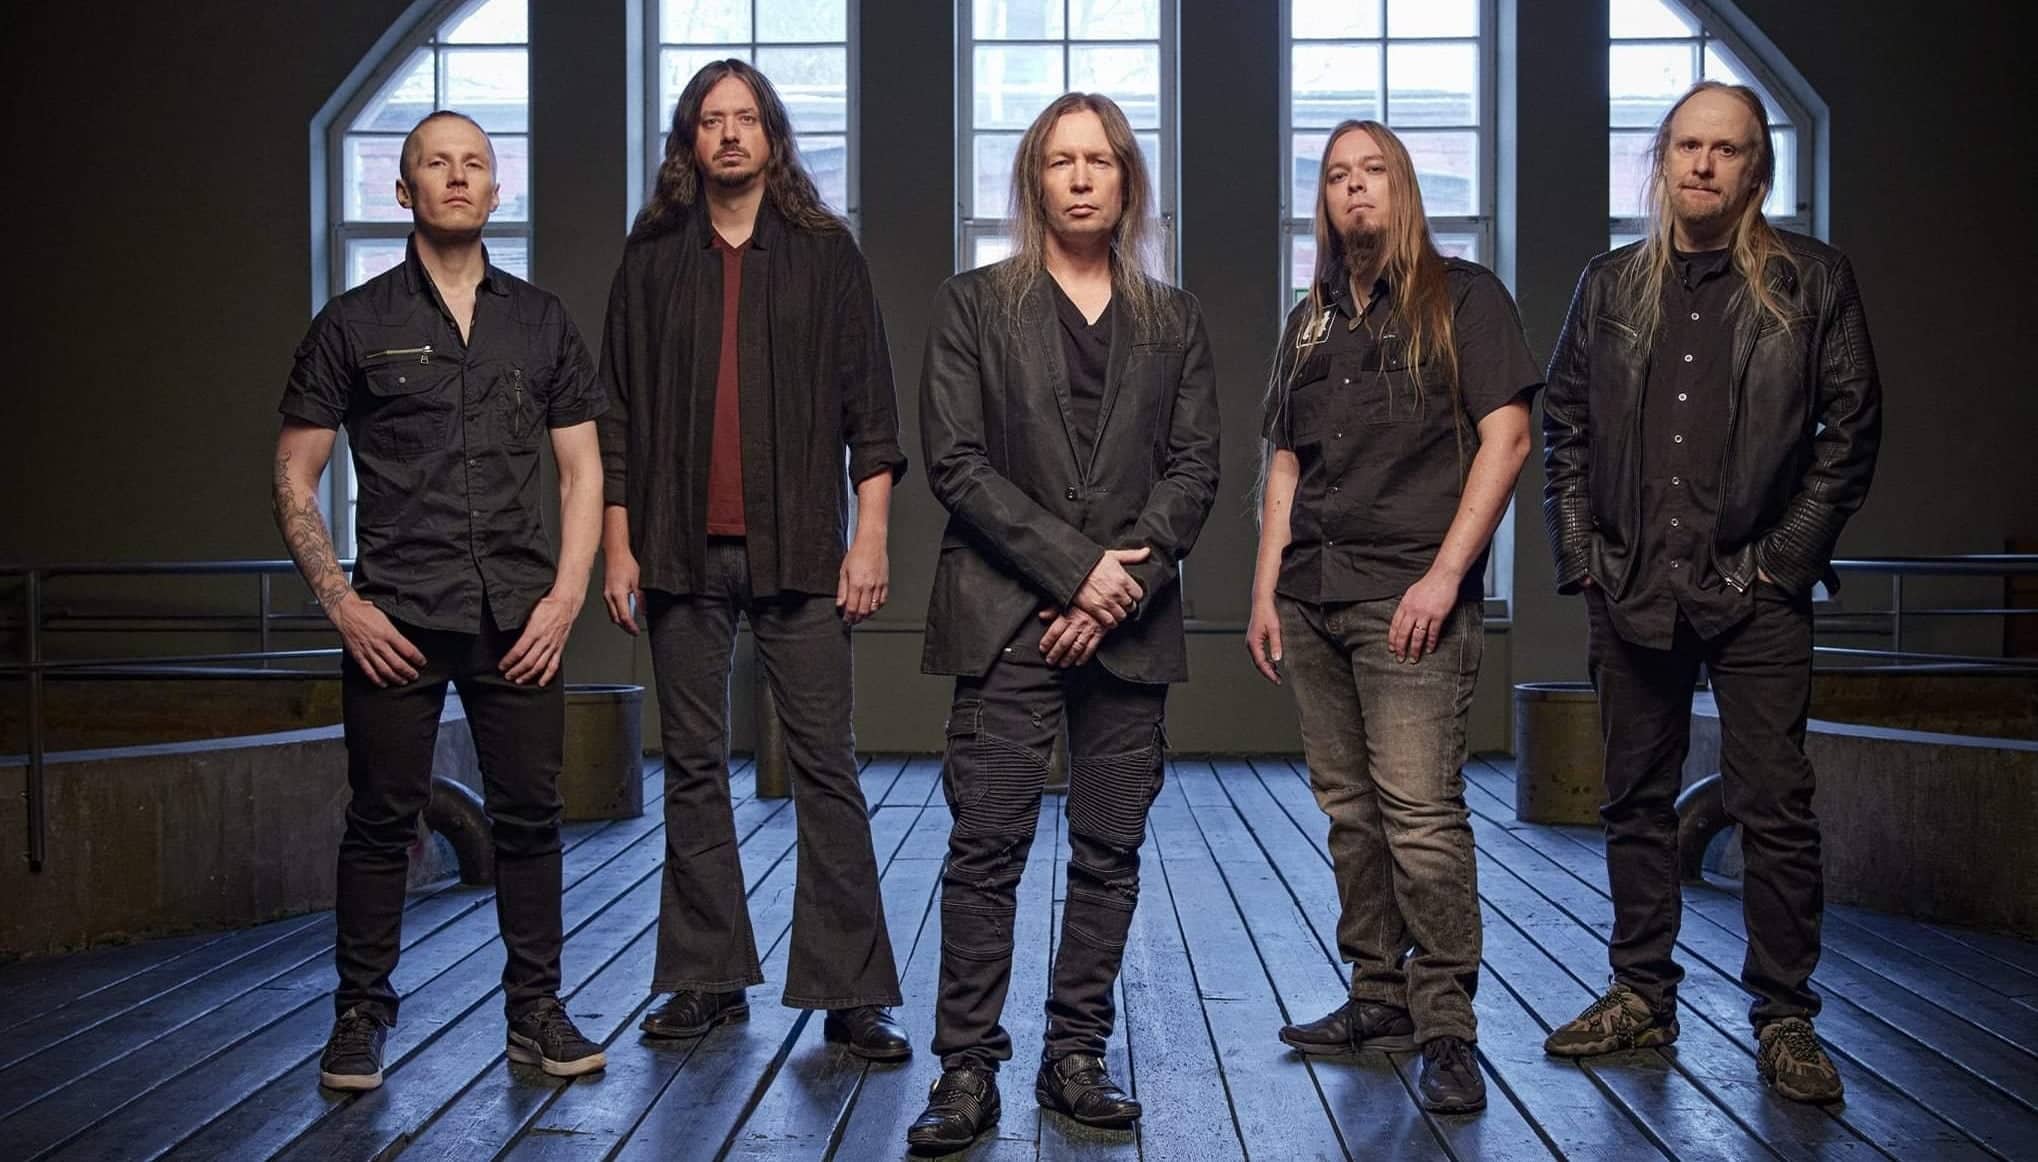 Read more about the article STRATOVARIUS release music video for the title track of their new album “Survive”.